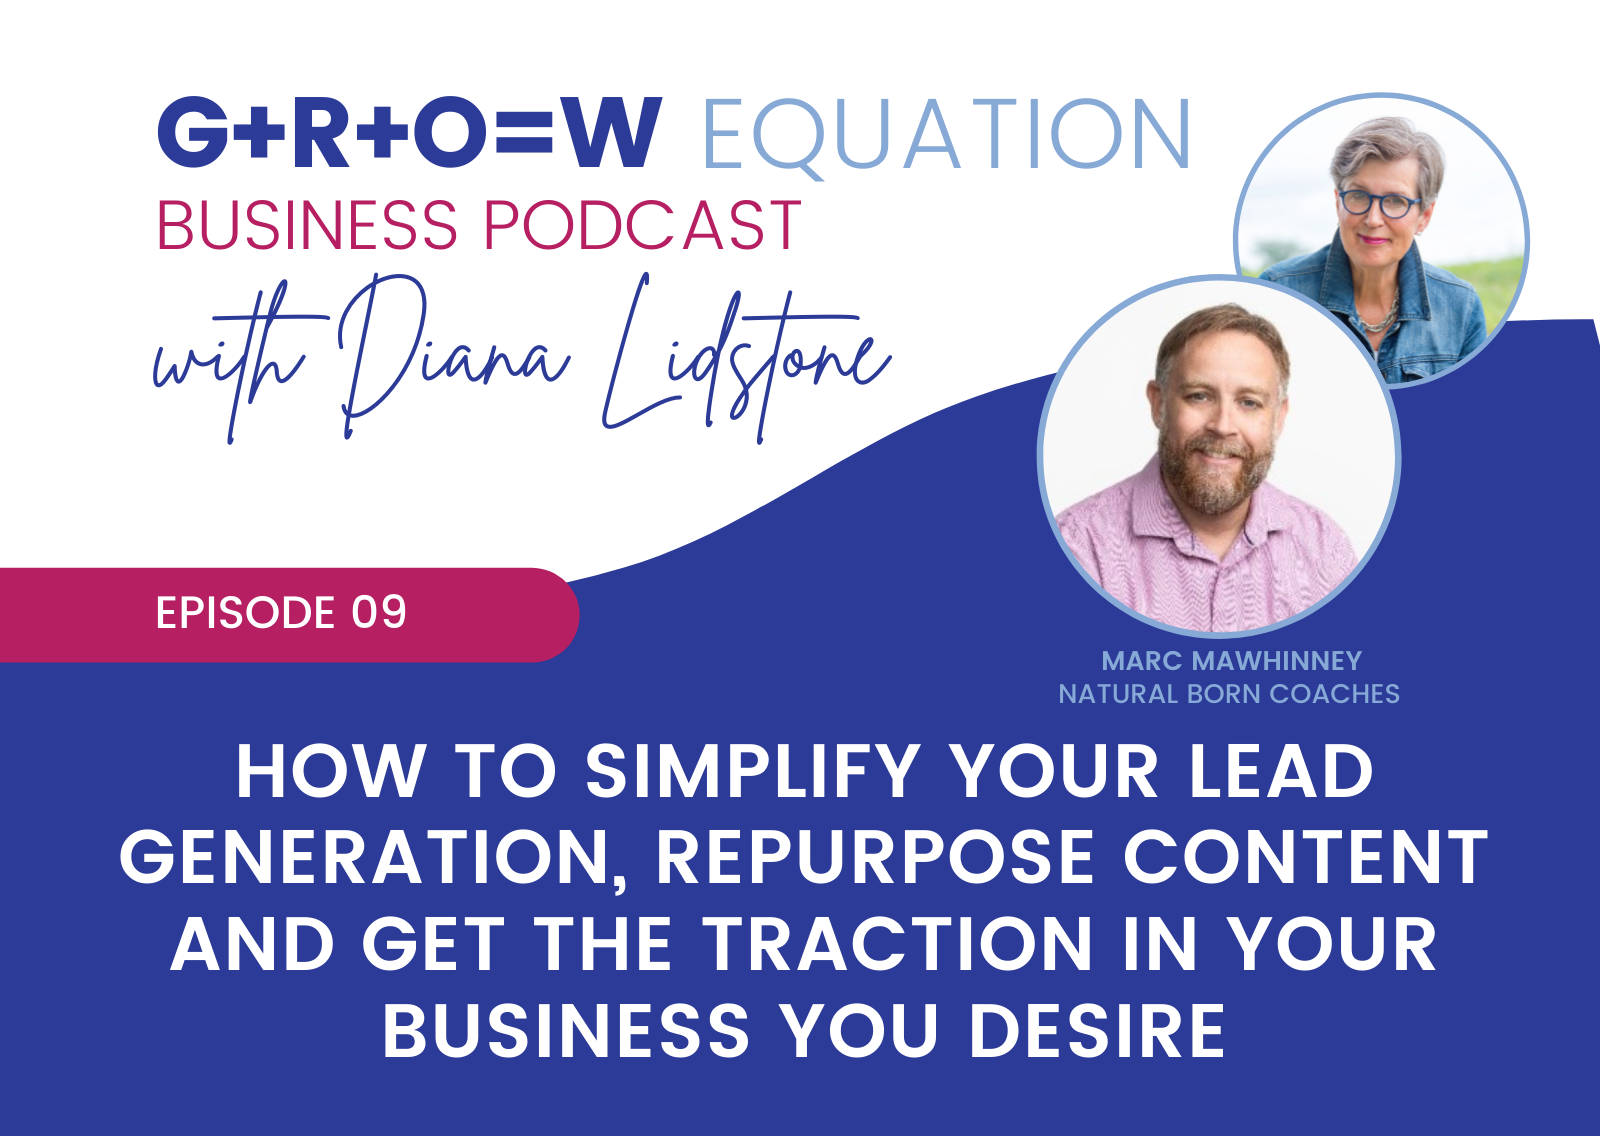 How to Simplify Your Lead Generation, Repurpose Content and Get the Traction in Your Business You Desire with Marc Mawhinney